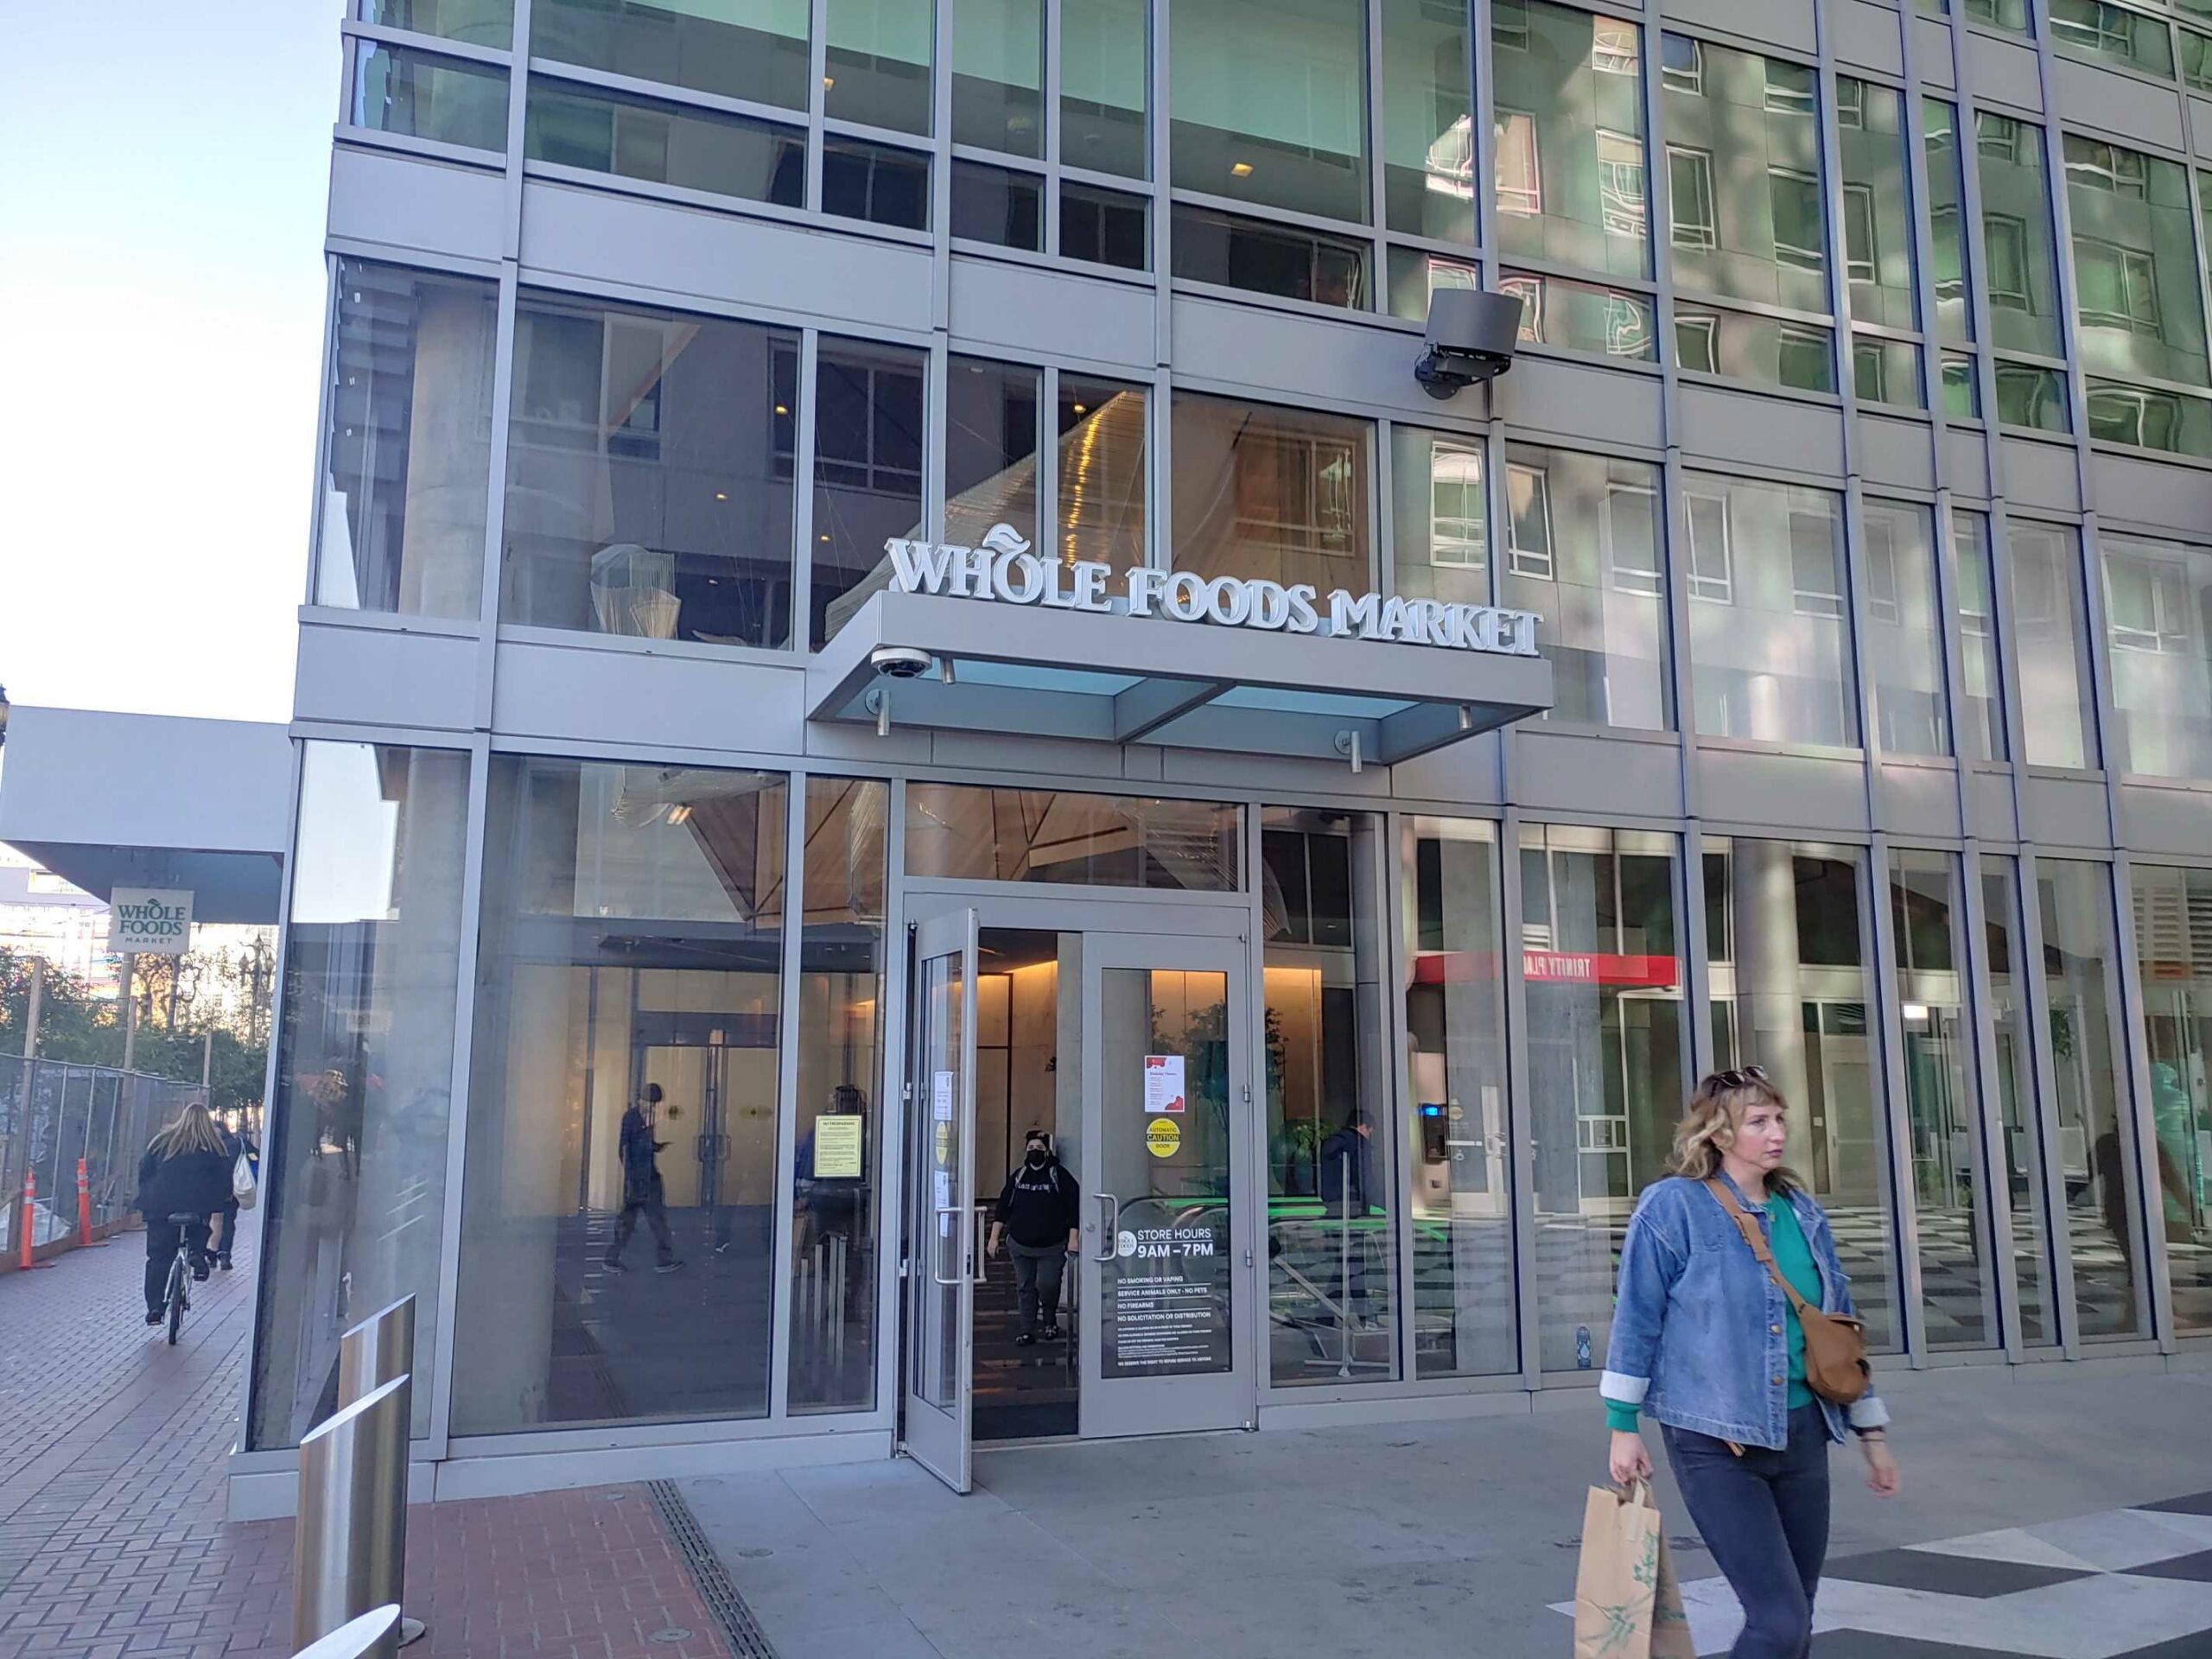 Whole Foods Market in Burbank is open for business, aiming to be a